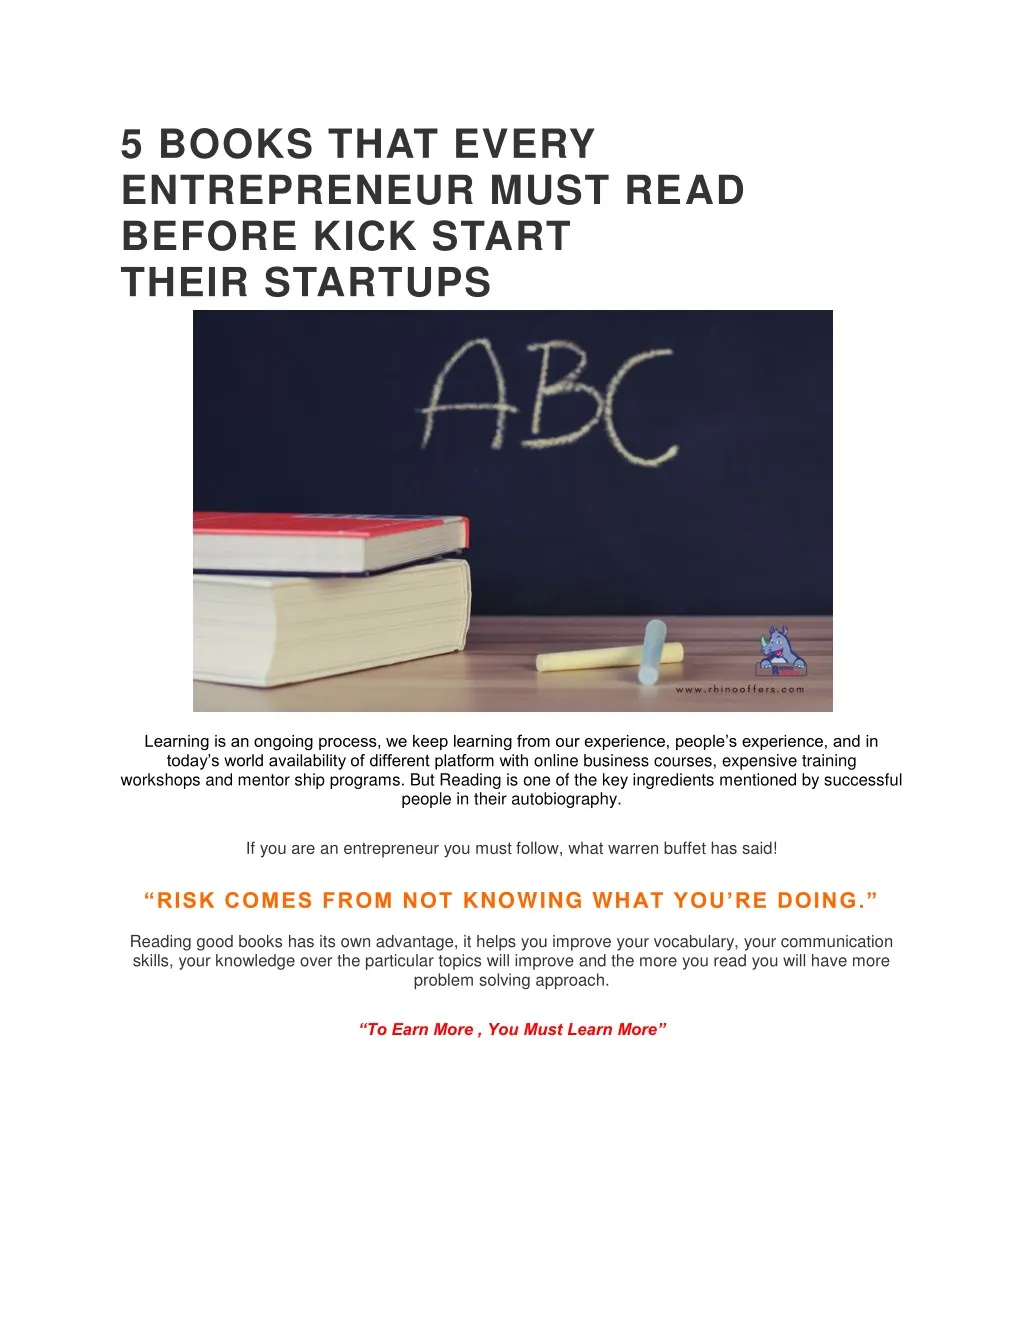 5 books that every entrepreneur must read before